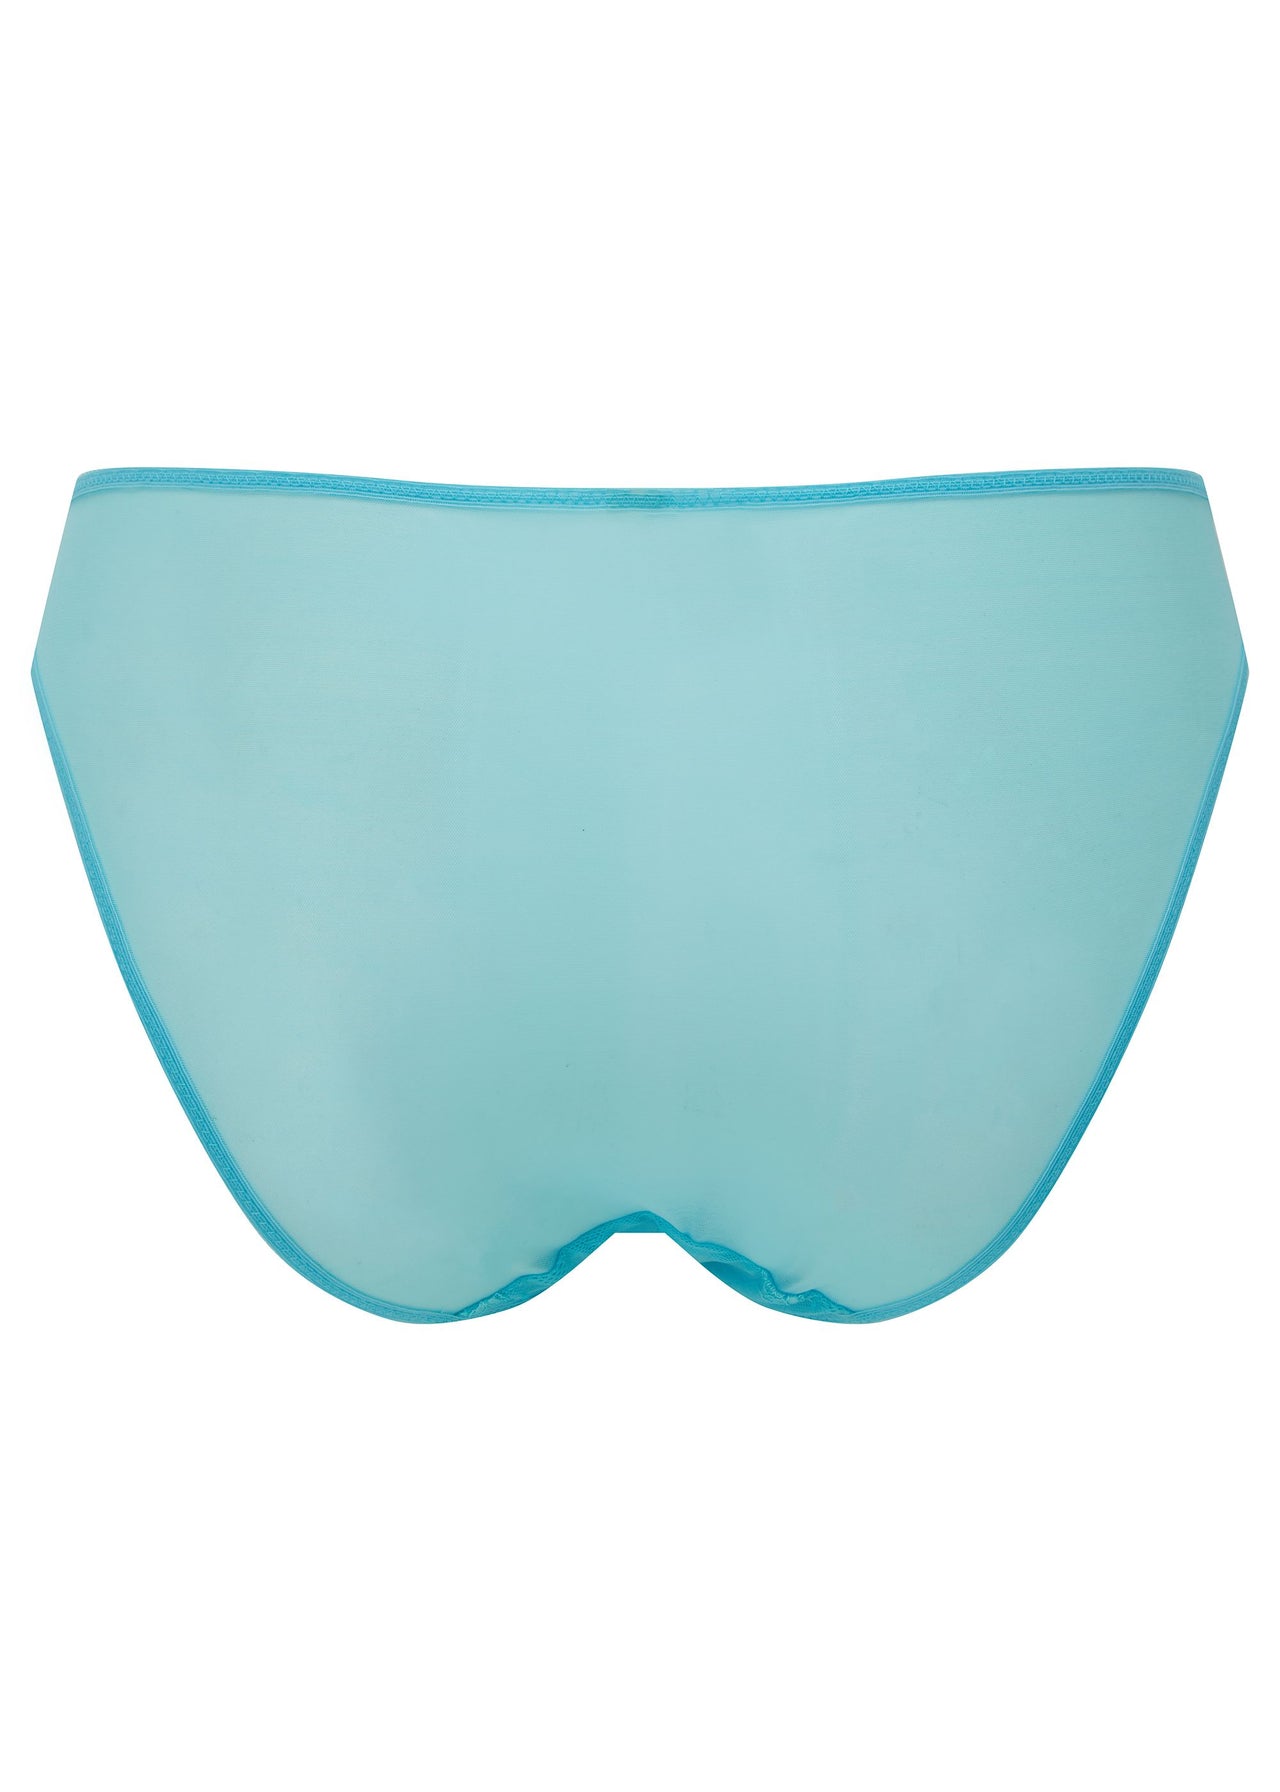 Gossard Glossies Lace Brief - Turquoise